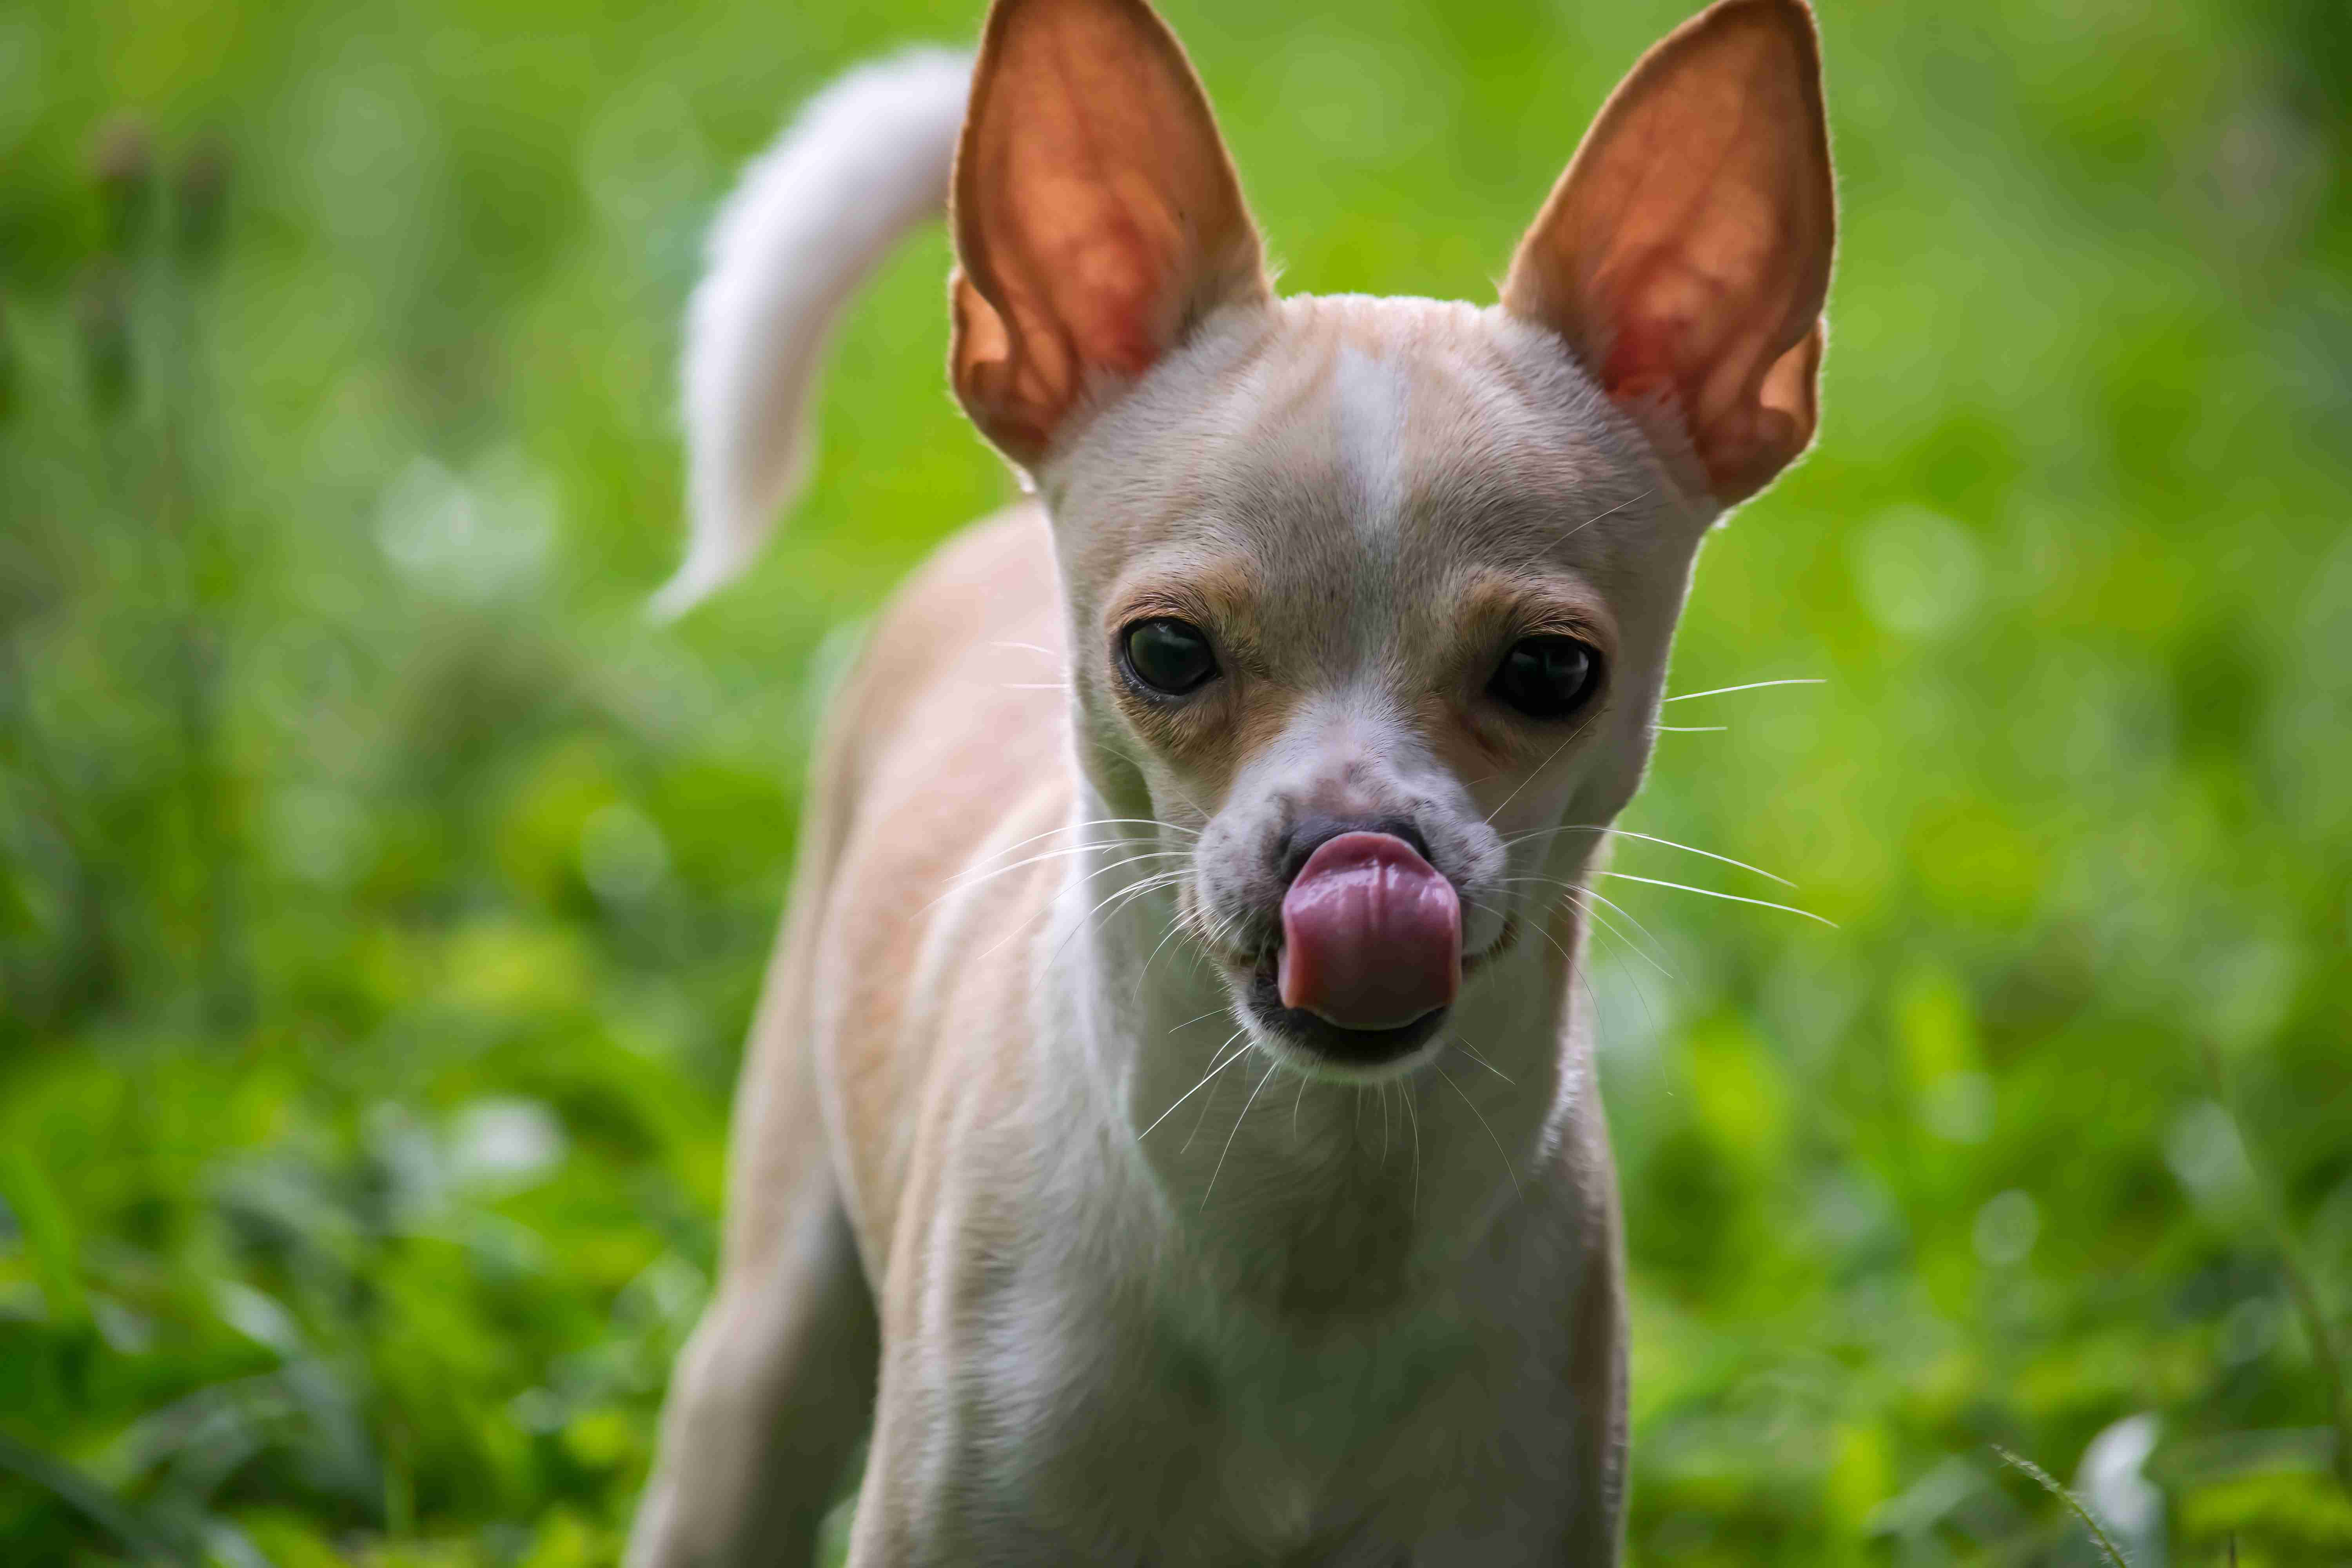 How can you prevent anger issues from developing in a Chihuahua?